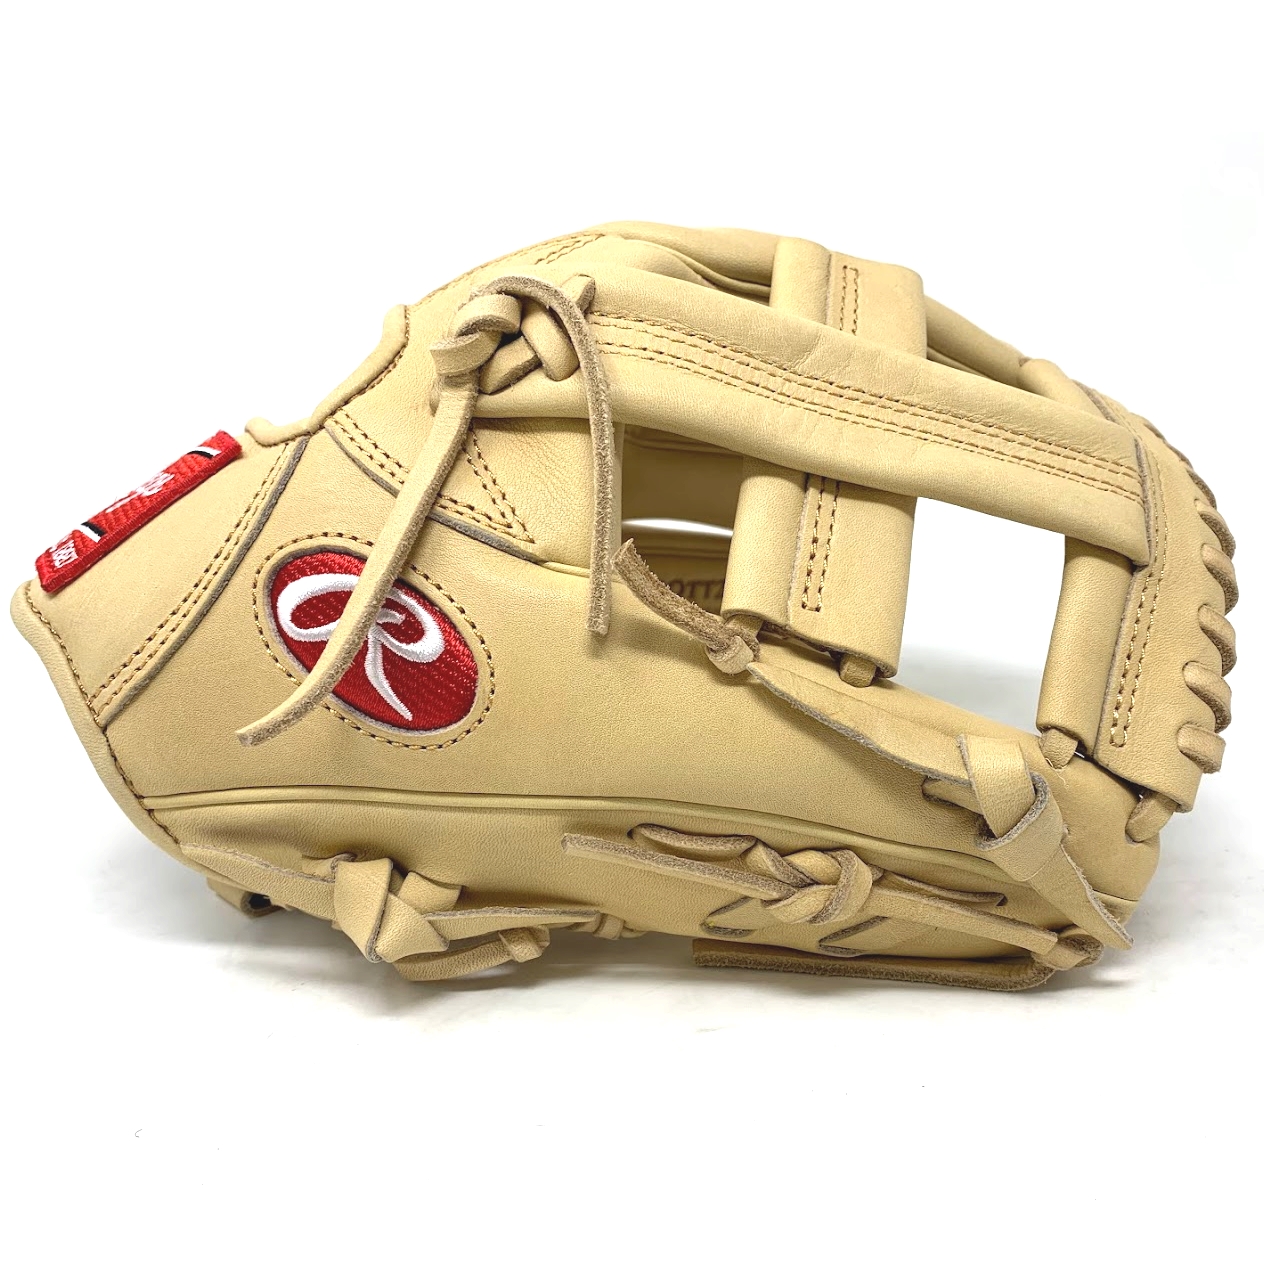 Take the field with this limited production Rawlings Heart of the Hide TT2 11.5 Inch infield glove offered by ballgloves.com and Don Morton Sports. Have a style all your own with this superior quality Rawlings ultra-premium steer-hide leather and TT2 pattern. Rawlings popular TT2 pattern offers a wide, shallow pocket allowing for quick transfers up the middle.   Pattern: TT2Sport: BaseballLeather: Heart of the HideFit: StandardThrowing Hand: Right-Hand ThrowPosition: InfieldSize: 11 1/2Web: Single PostColor: CamelLogo: PatchLaces: CamelNo Palm PadWrist Lining: Thermo FormedBreak-In: Standard